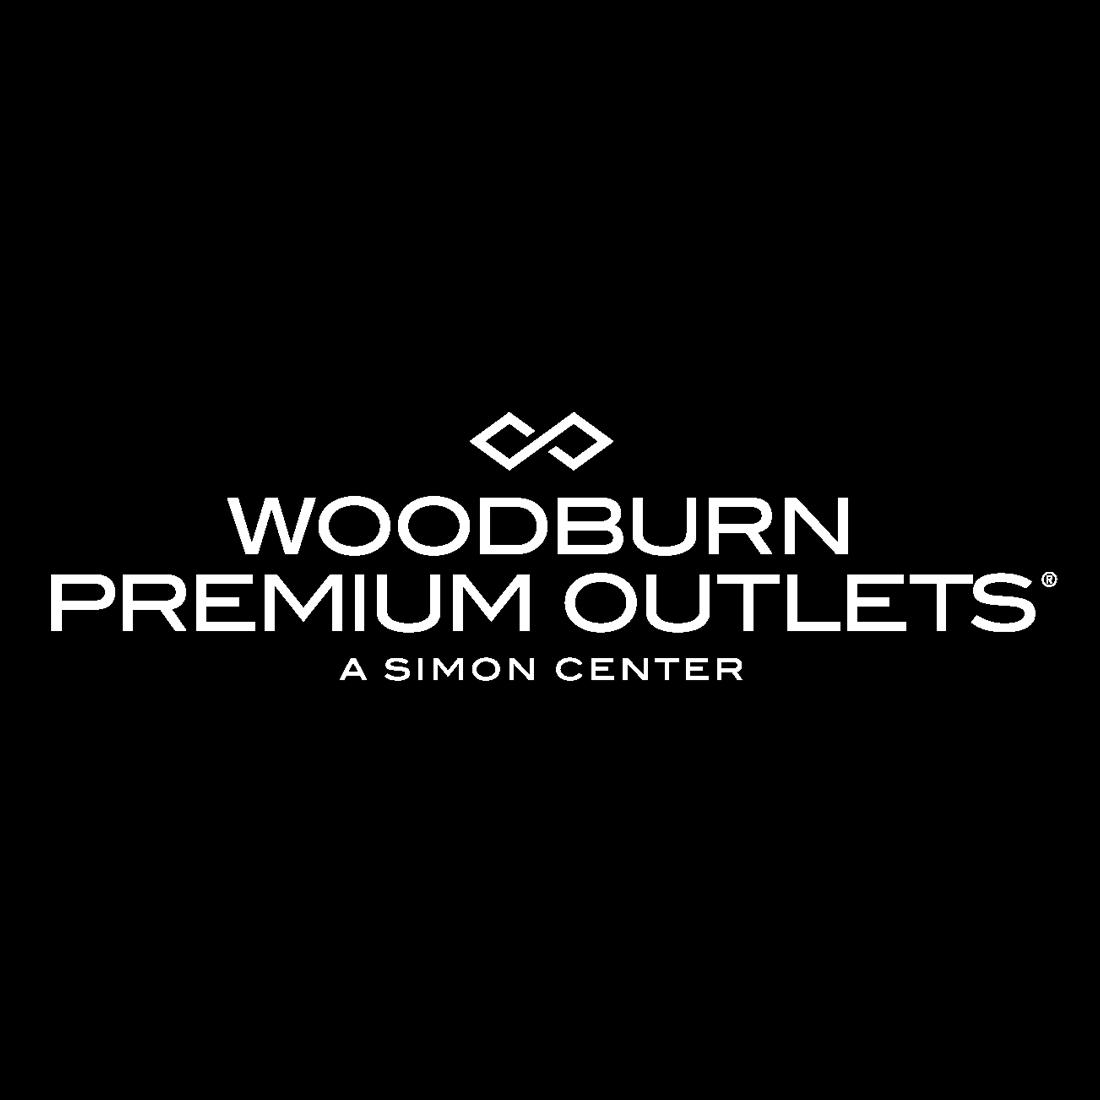 Woodburn Premium Outlets - Woodburn, OR 97071 - (503)981-1900 | ShowMeLocal.com